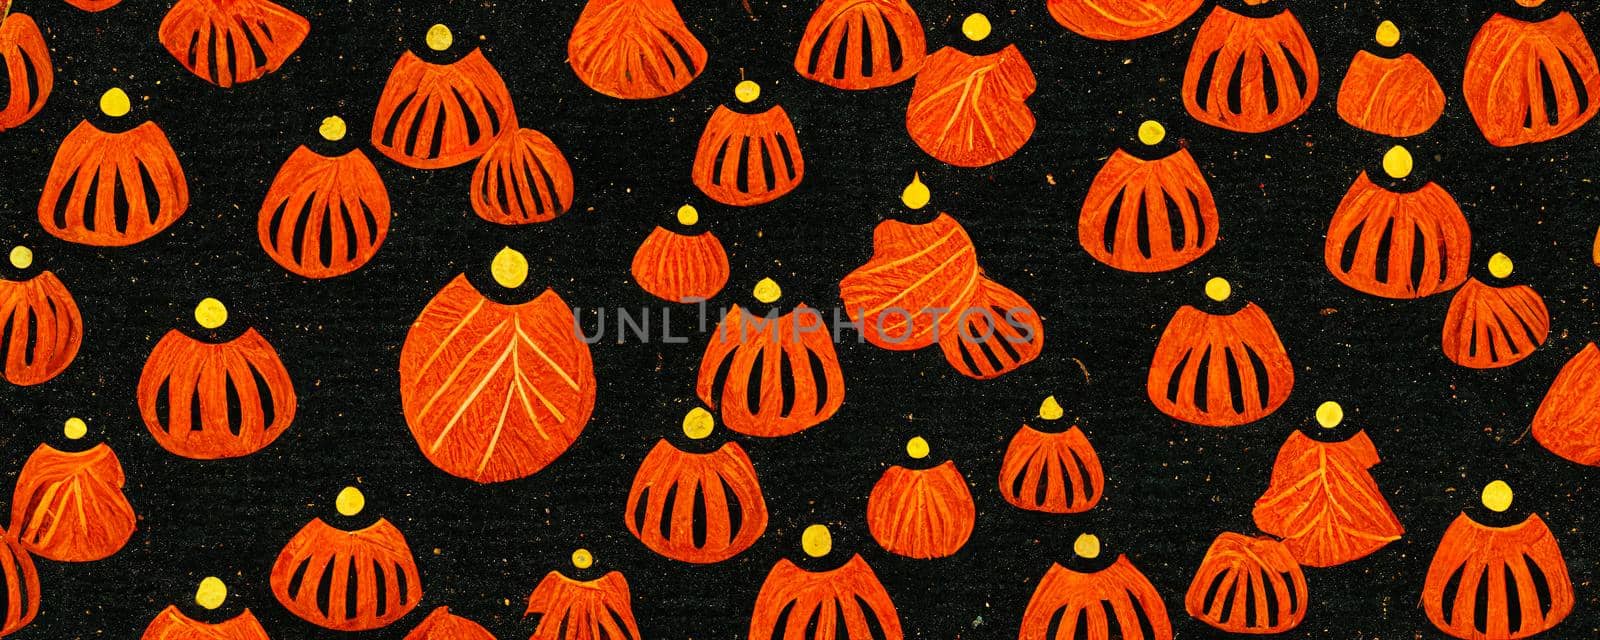 abstract illustration on the theme of Halloween with orange pumpkins on a black background.